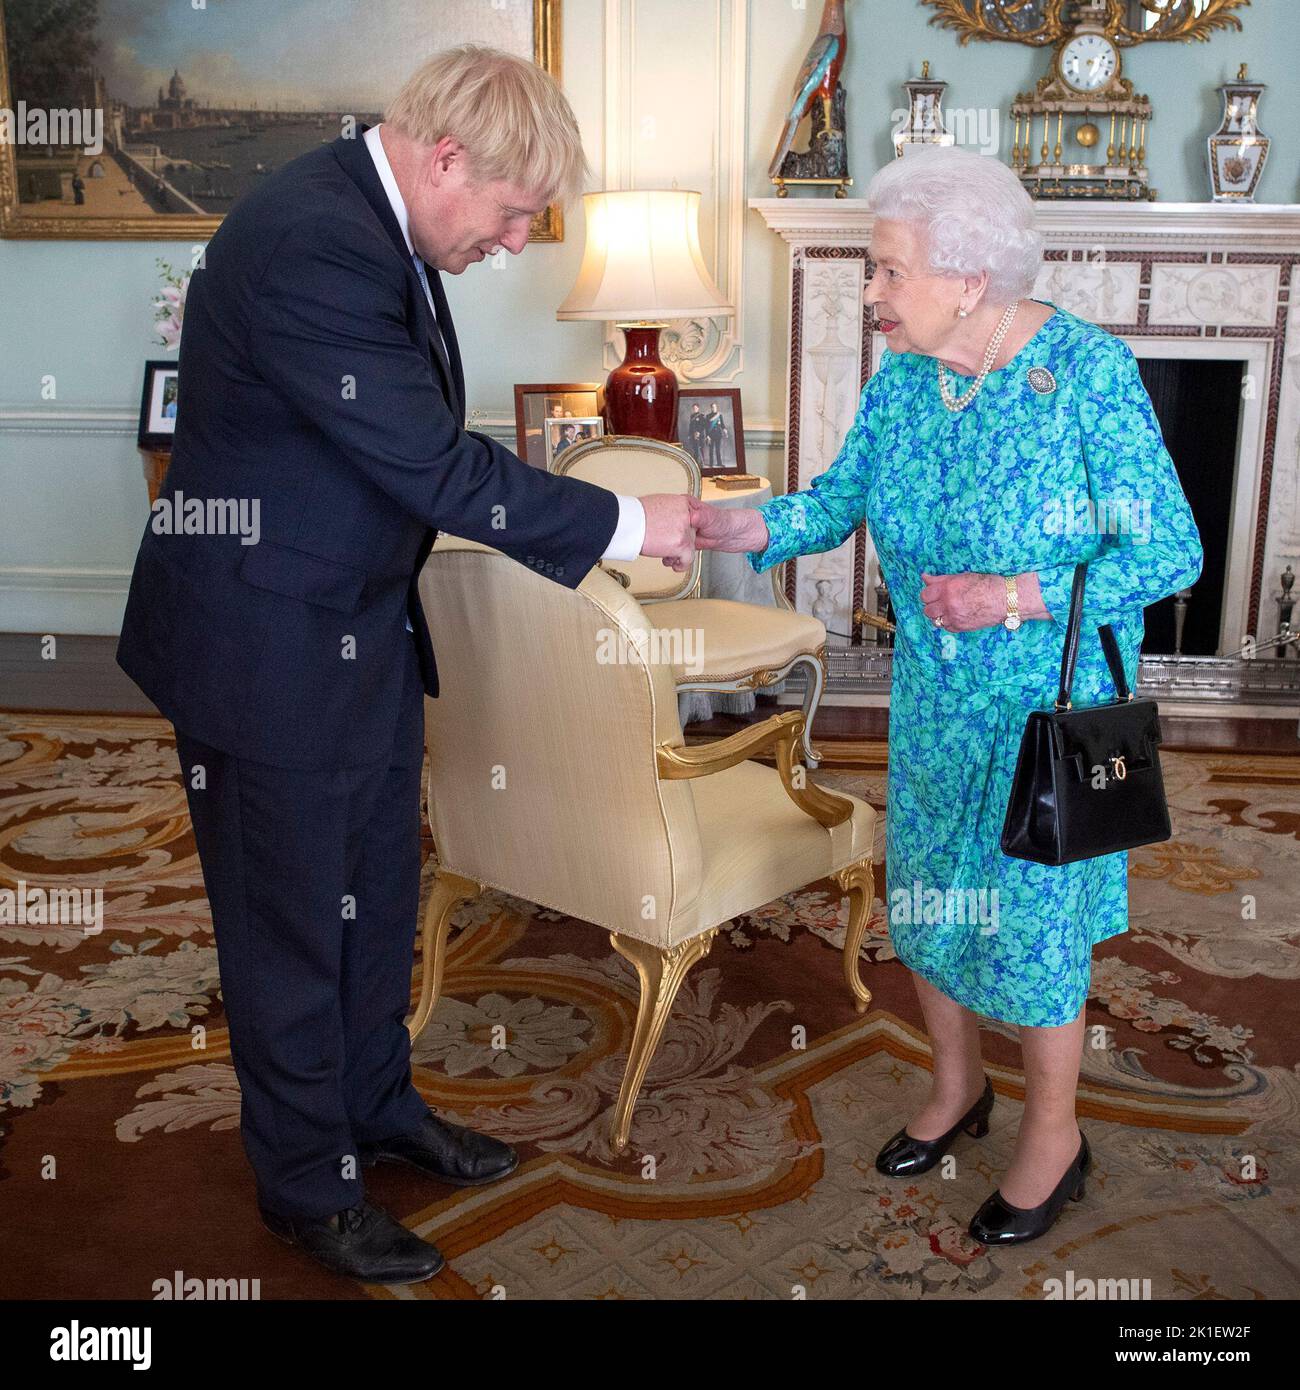 File photo dated 24/7/2019 of Queen Elizabeth II welcoming the newly-elected leader of the Conservative party Boris Johnson during an audience in Buckingham Palace, London, where she invited him to become Prime Minister and form a new government. Stock Photo